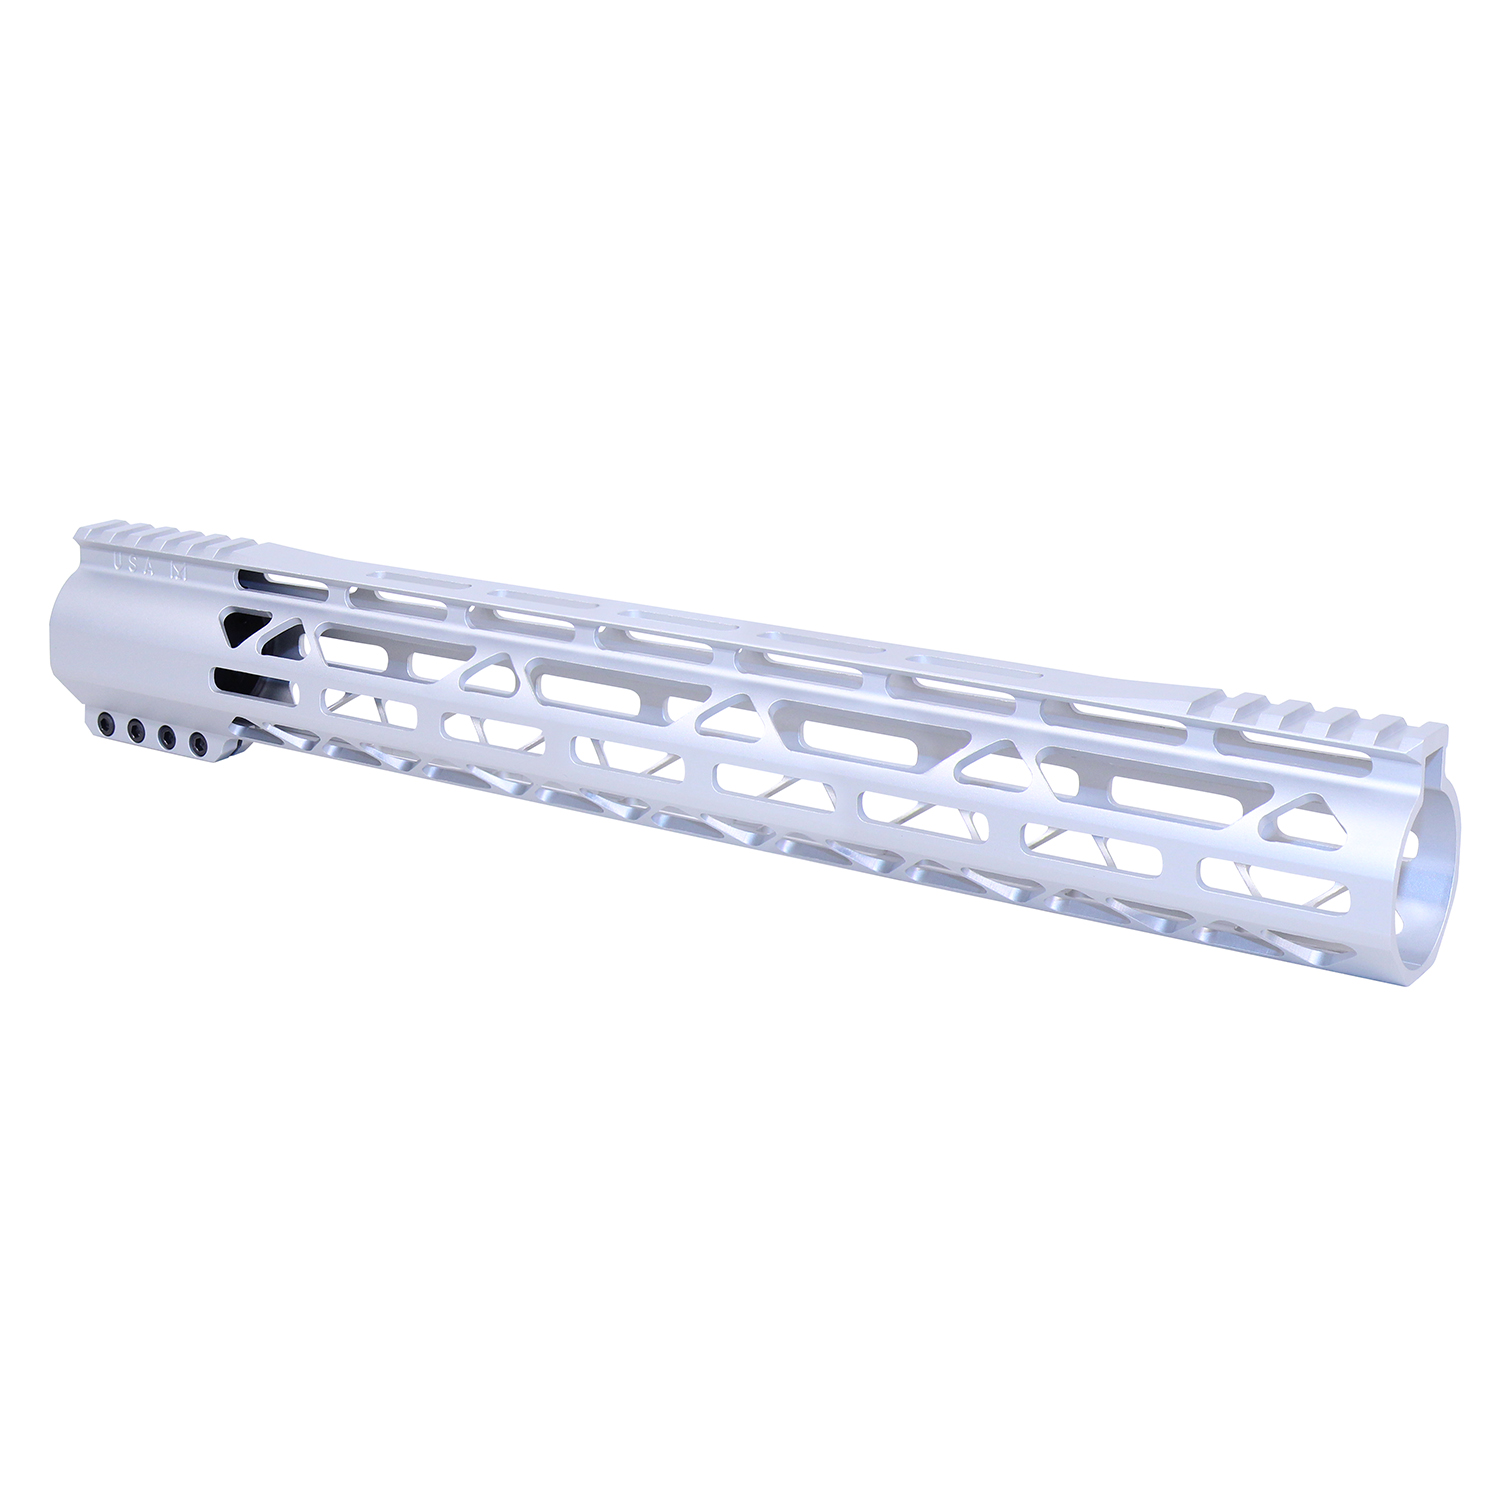 AR-308 15" AIR-LOK Series M-LOK Compression Free Floating Handguard With Monolithic Top Rail (Gen 2) (Anodized Clear)